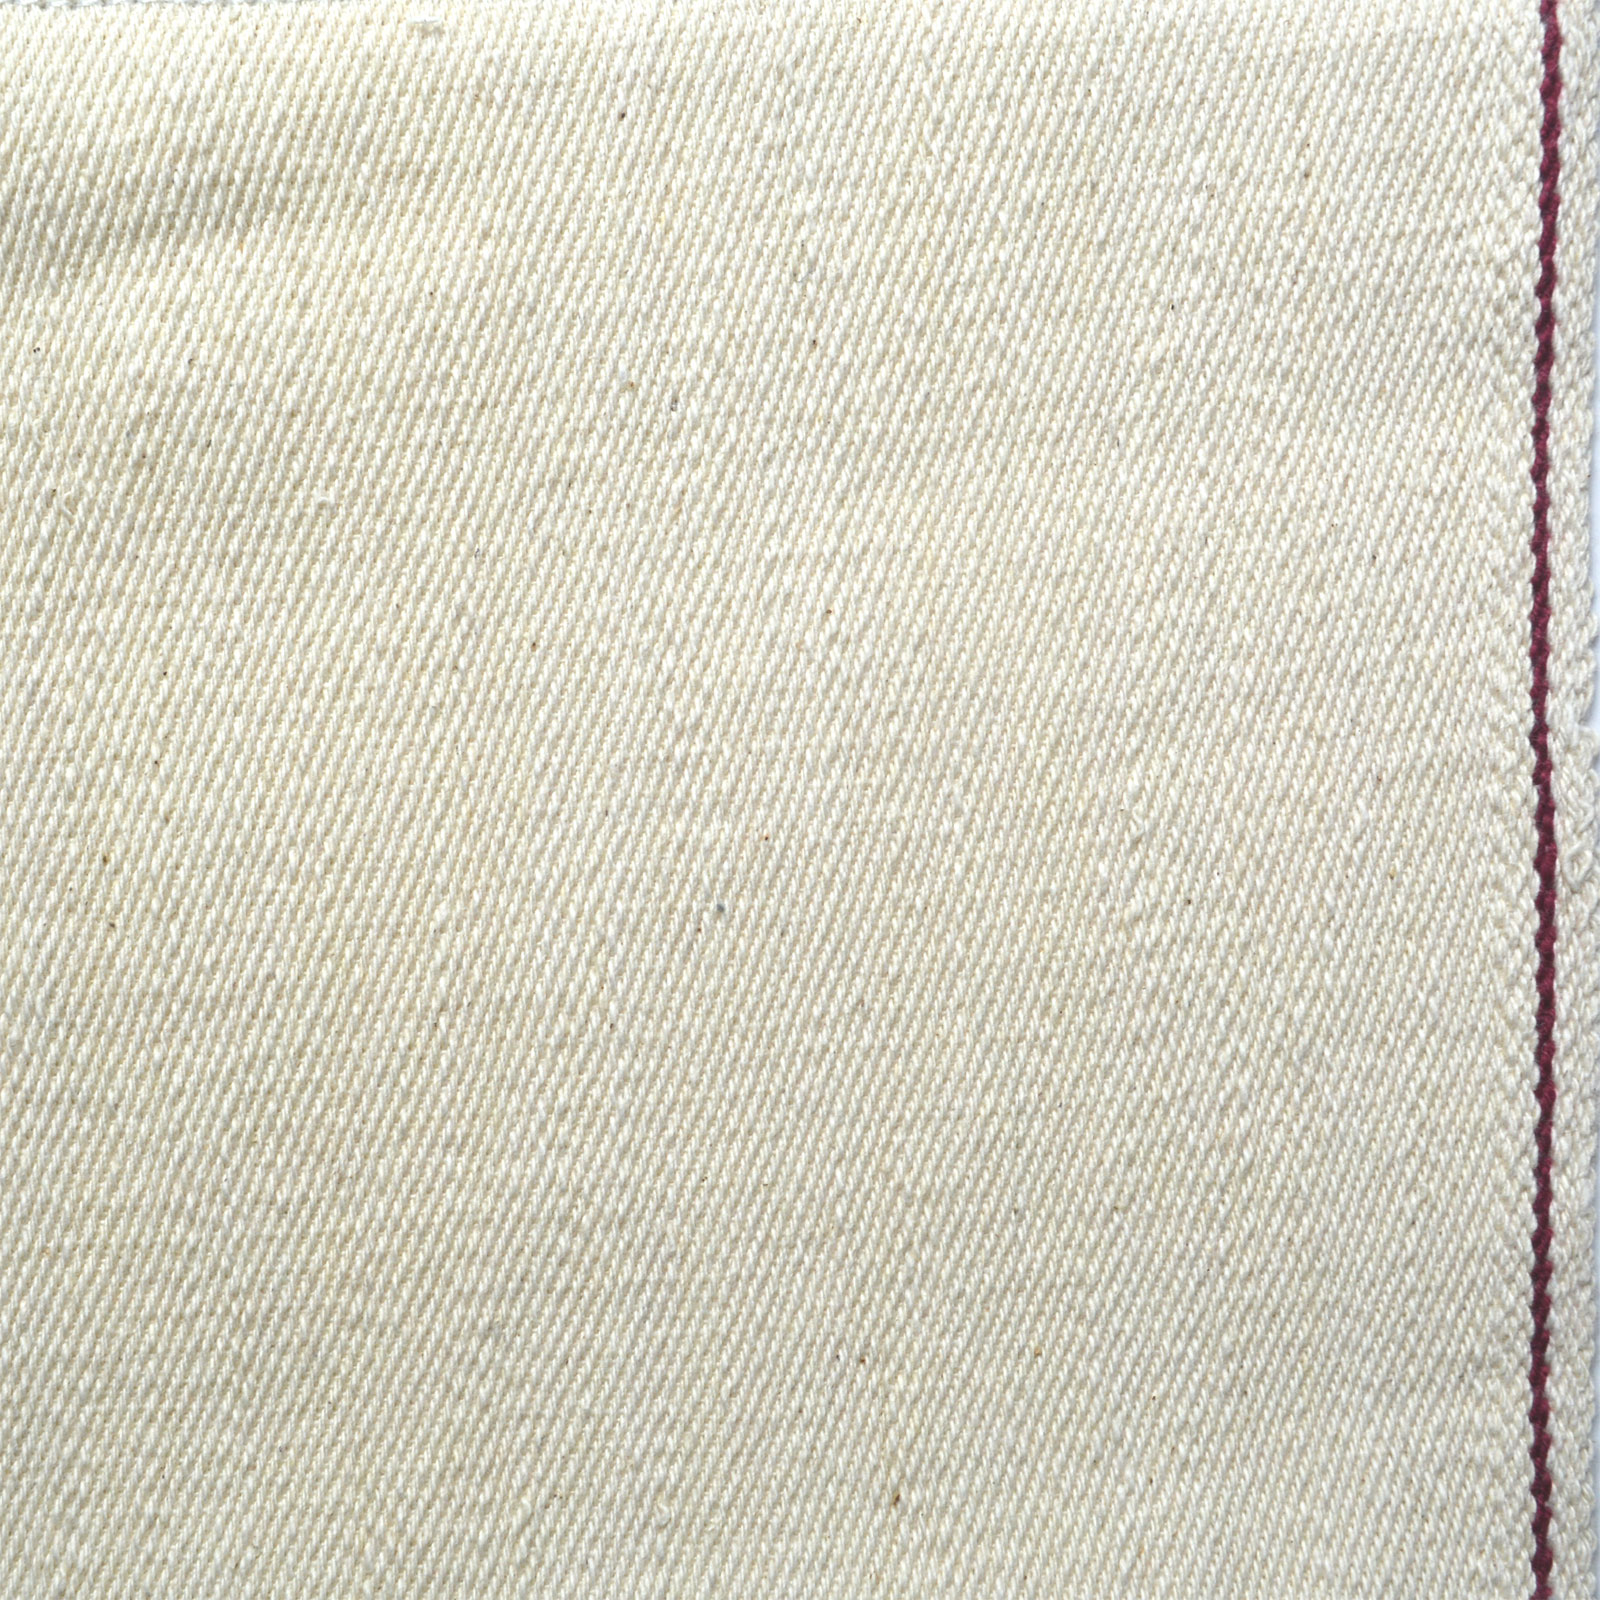 Moss Home | Made in the USA - Wave Denim Fabric Swatch